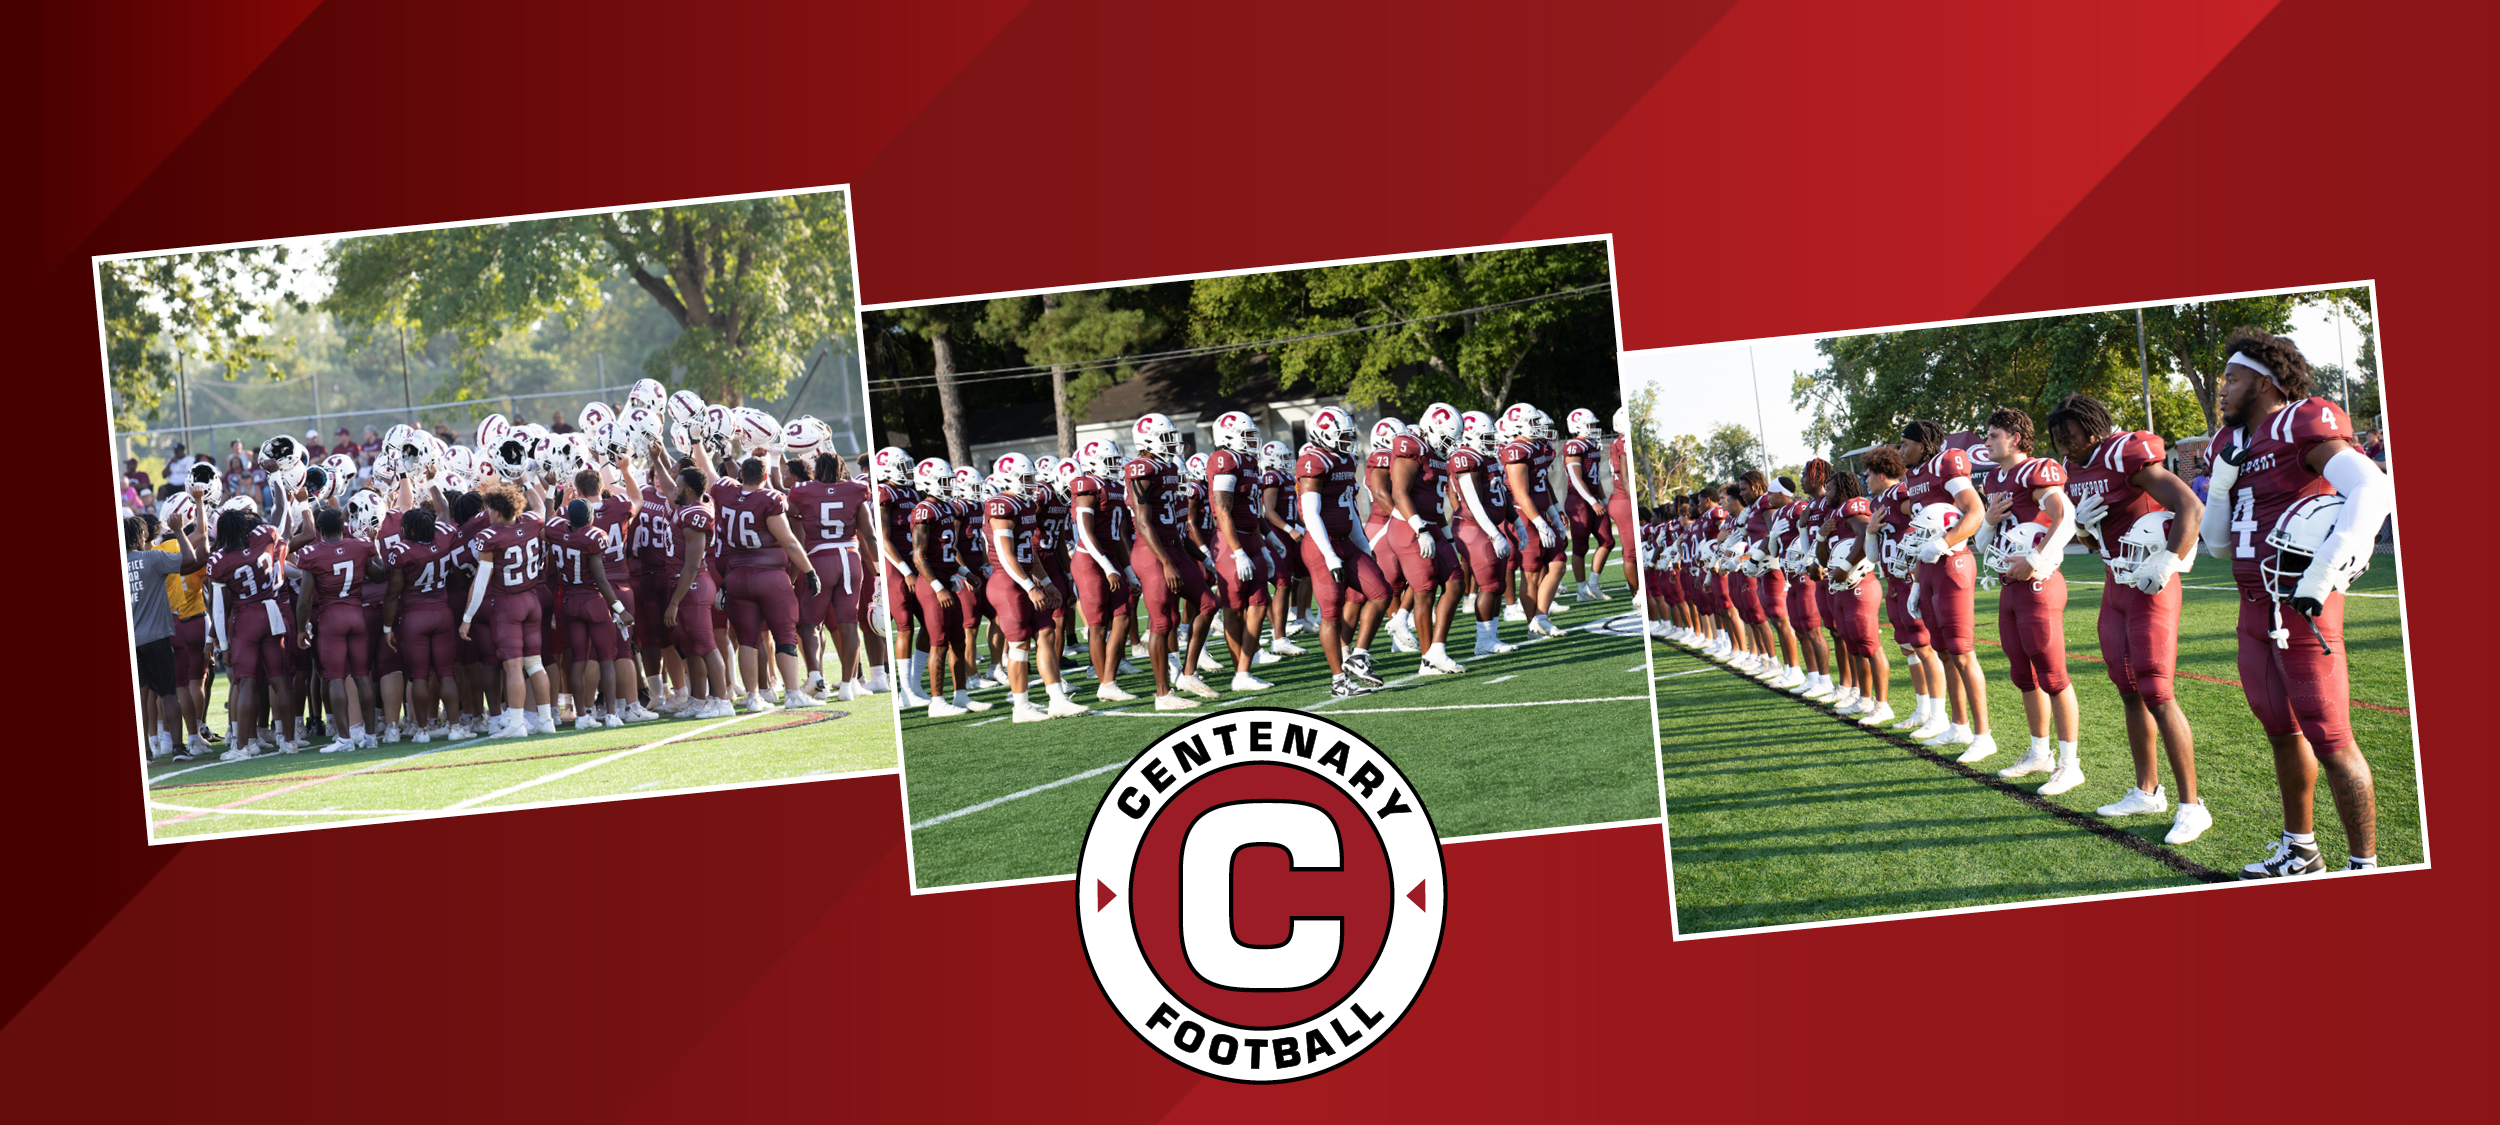 Now We Go: Football Returns to Centenary In Grand Fashion